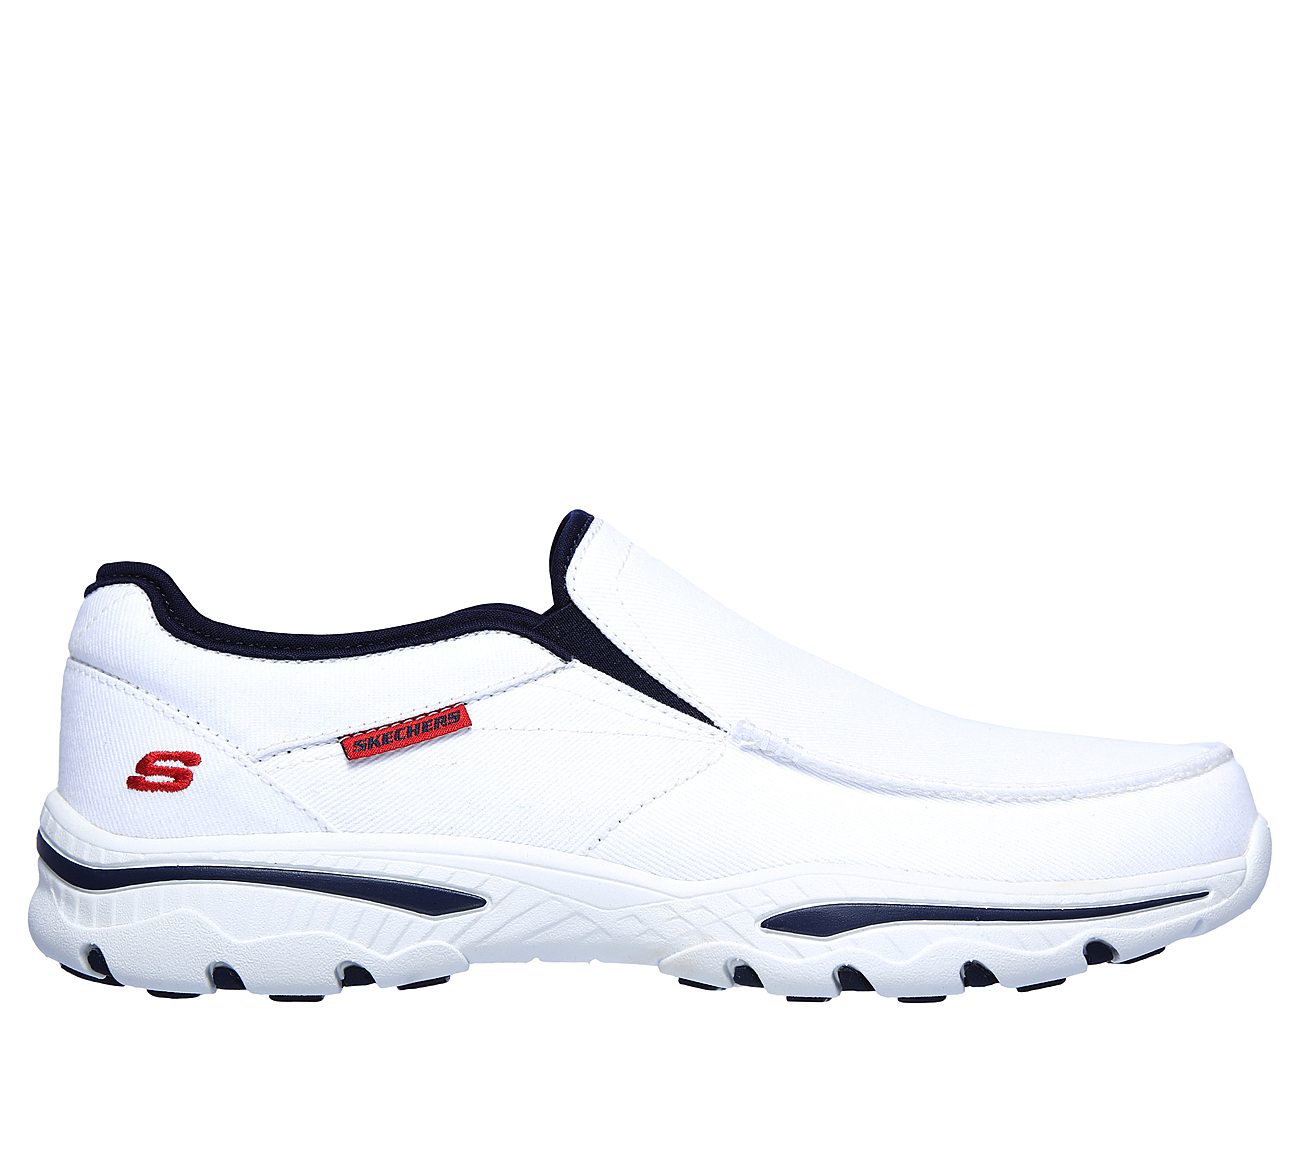 SKECHERS Relaxed Fit: Creston - Moseco 